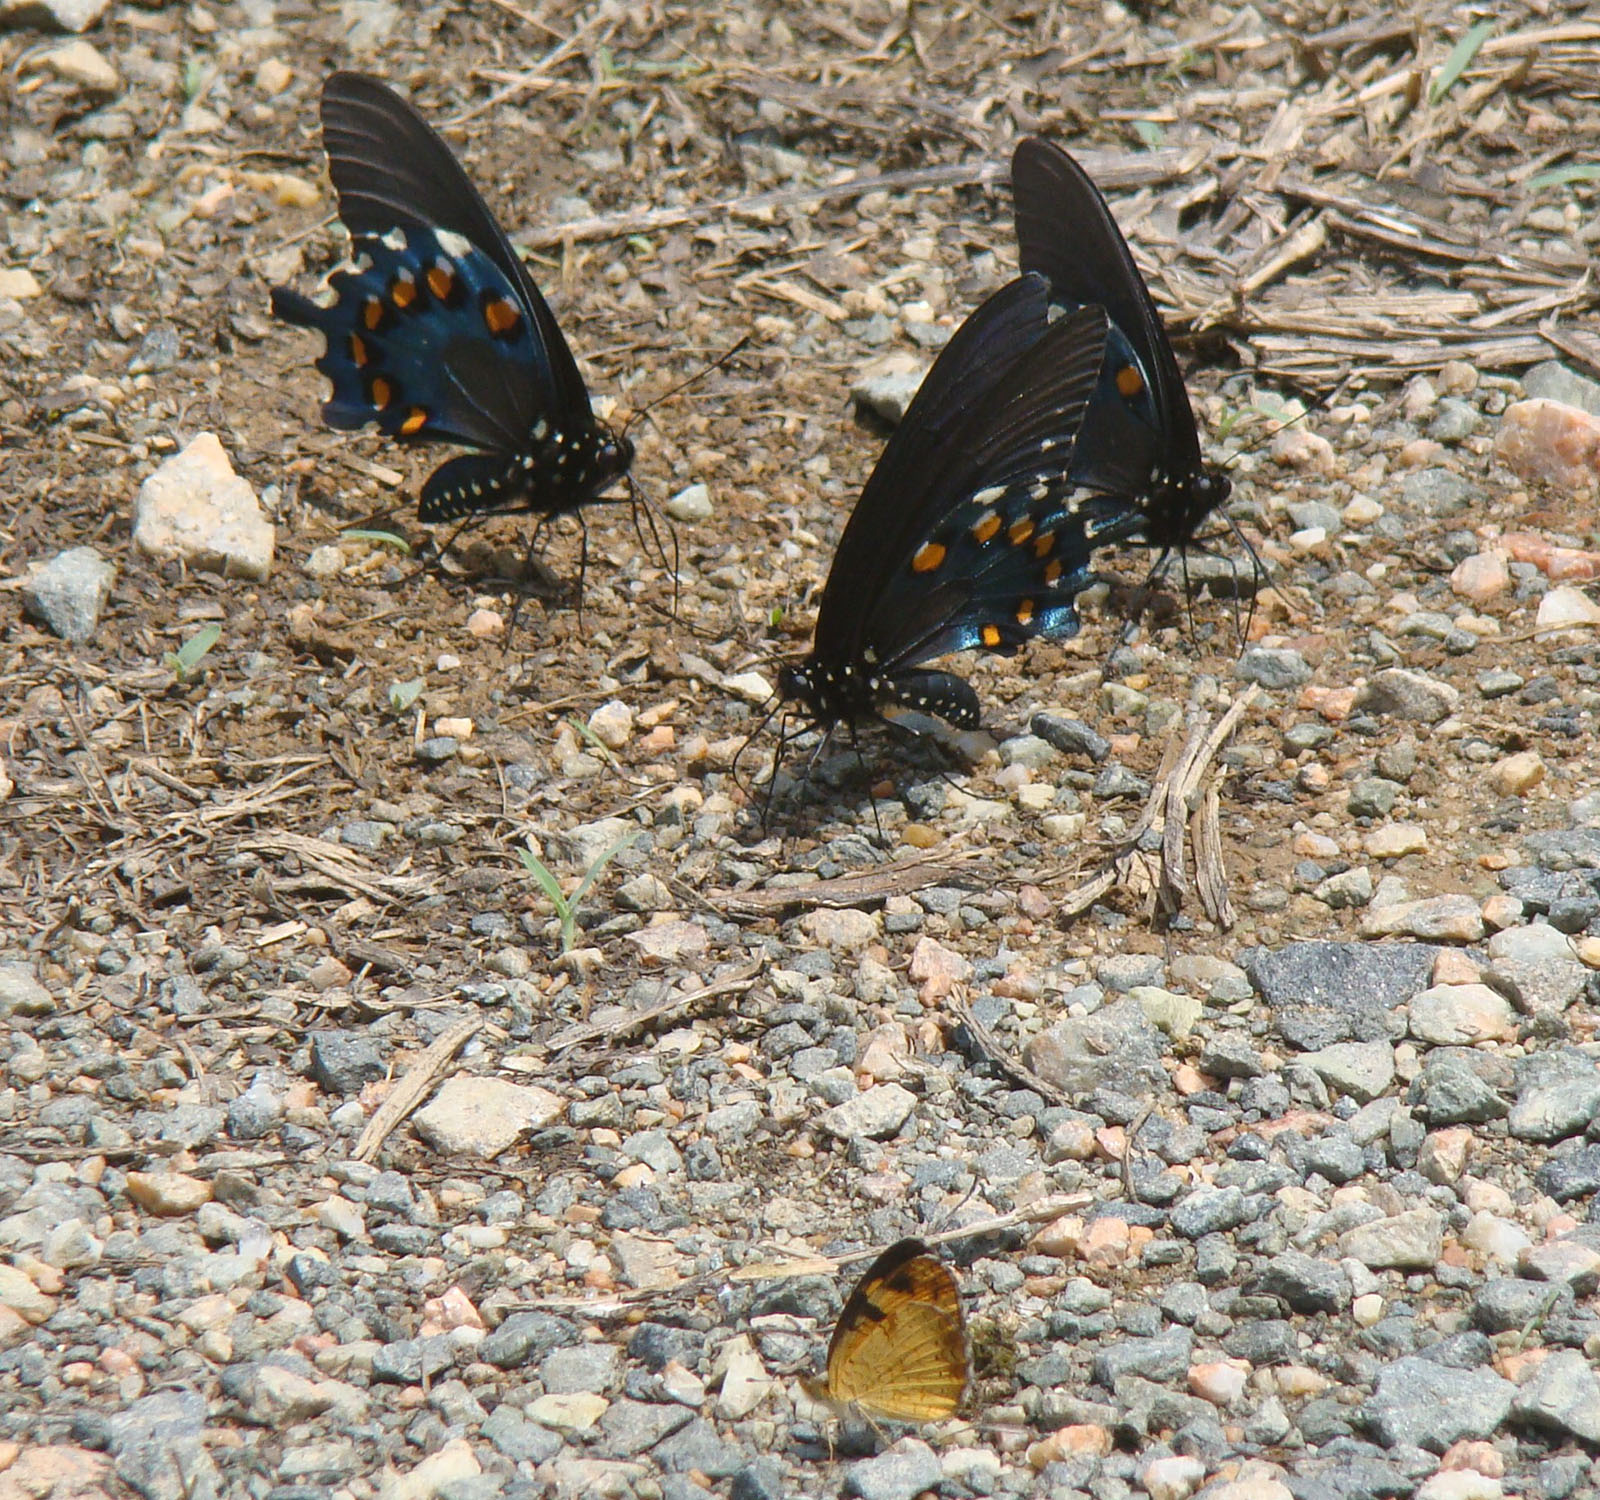 A photo of three larger butterflies with black wings with blue and orange spots, with a smaller butterfly with yellow and black wings. 